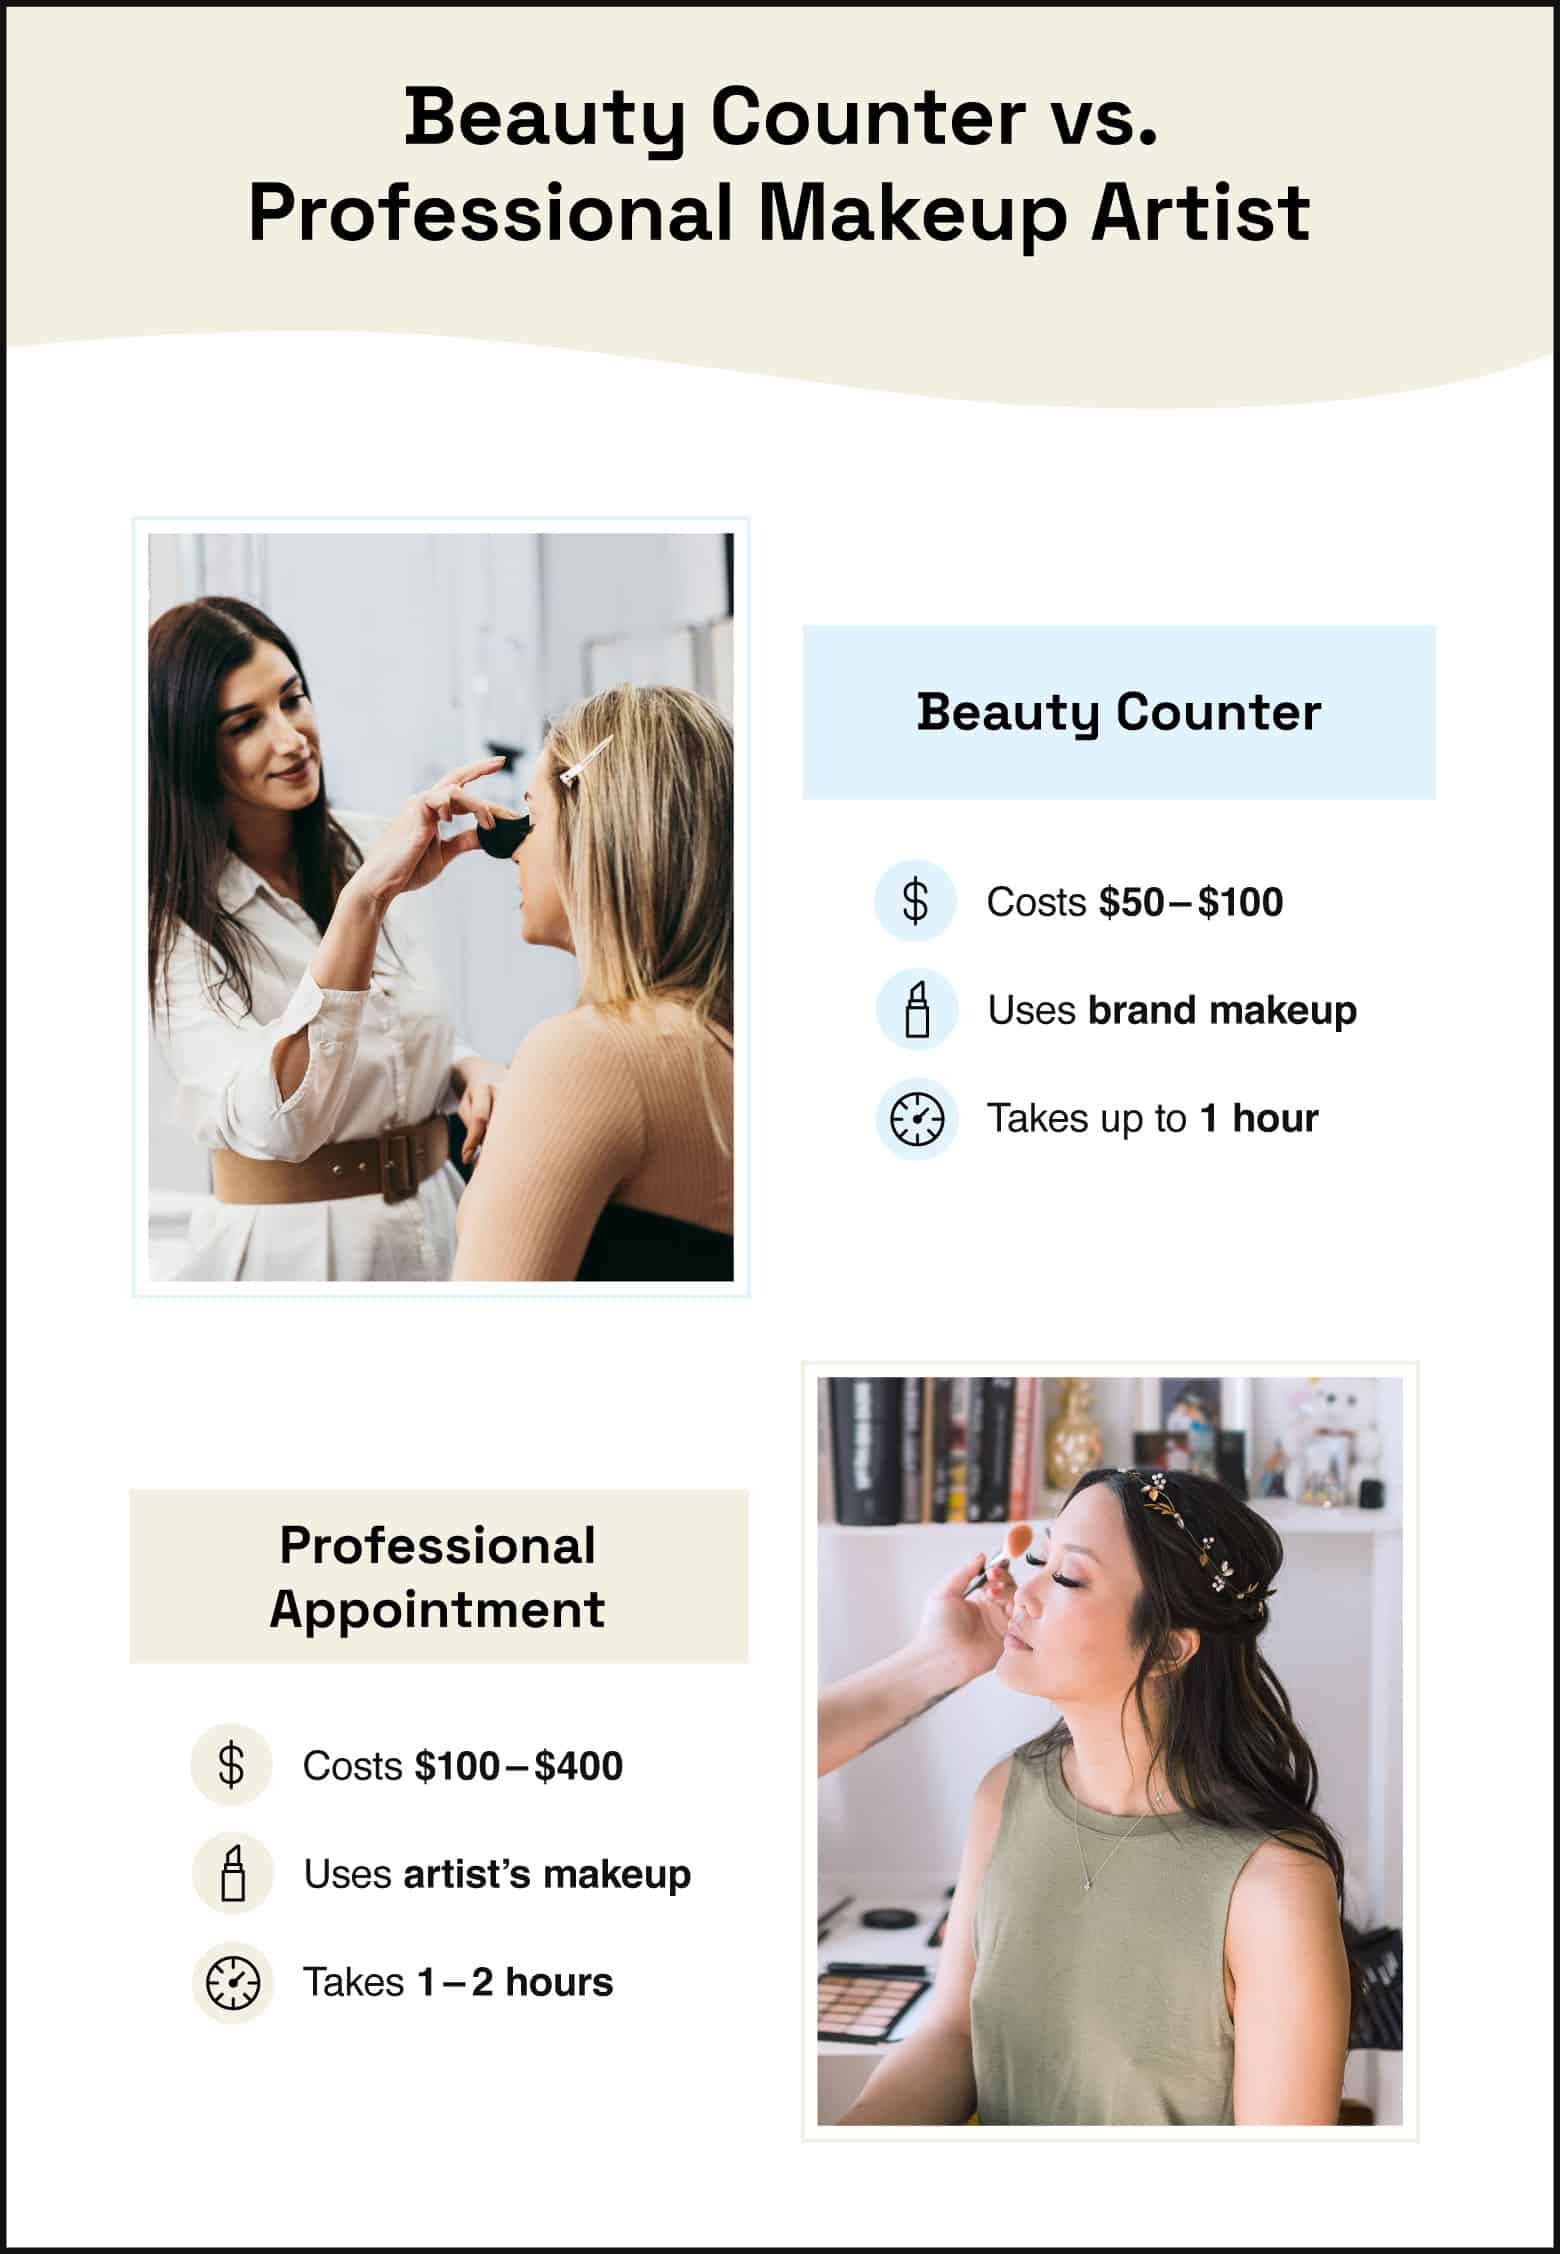  Image comparing the differences between a beauty counter and professional makeup artist, two seperate photos showing makeup artists applying makeup to clients